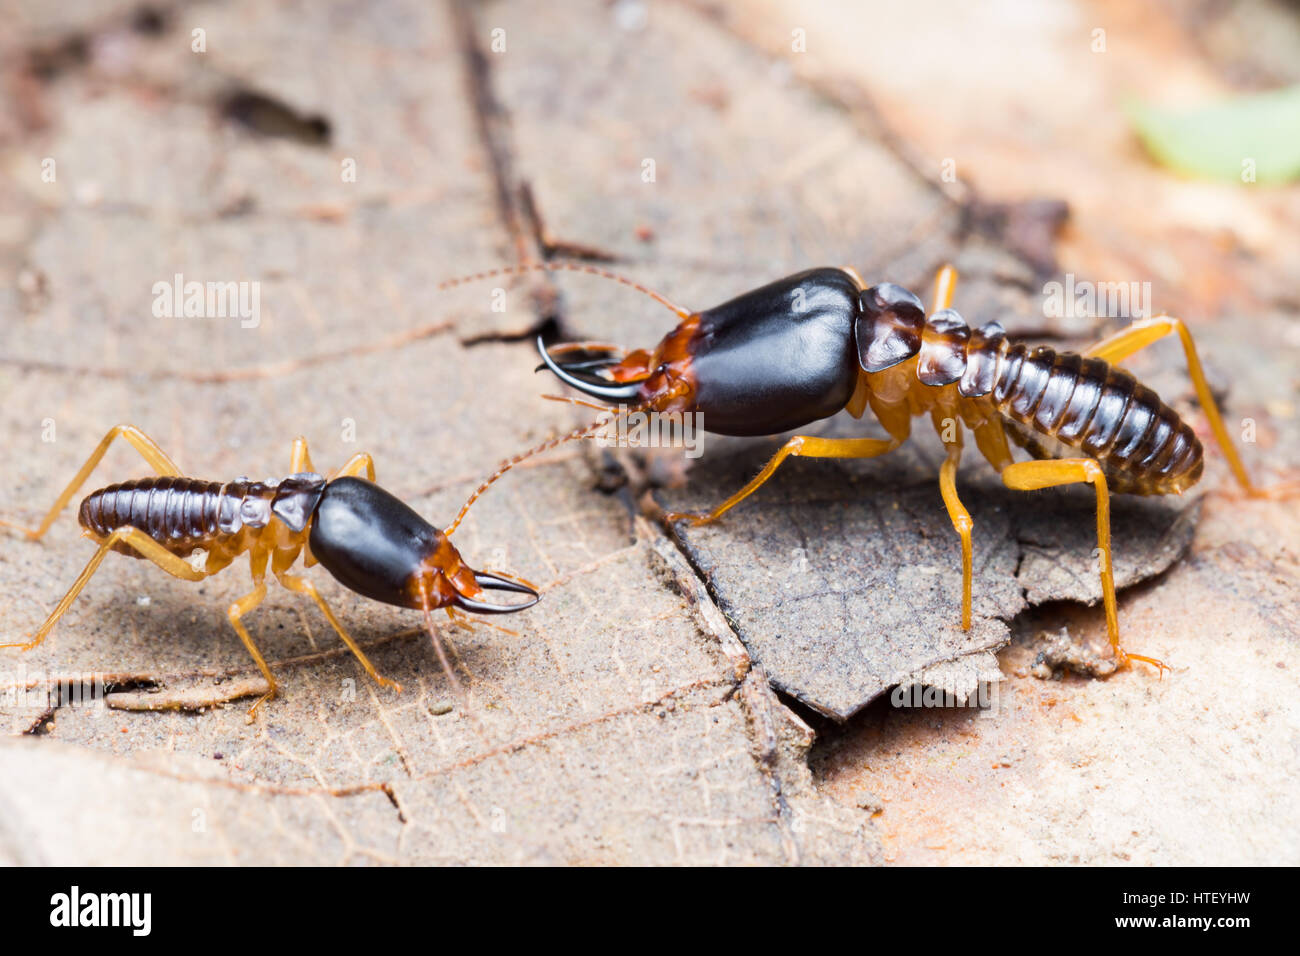 The Soldier Termites Of Soil Eaters Stock Photo Alamy